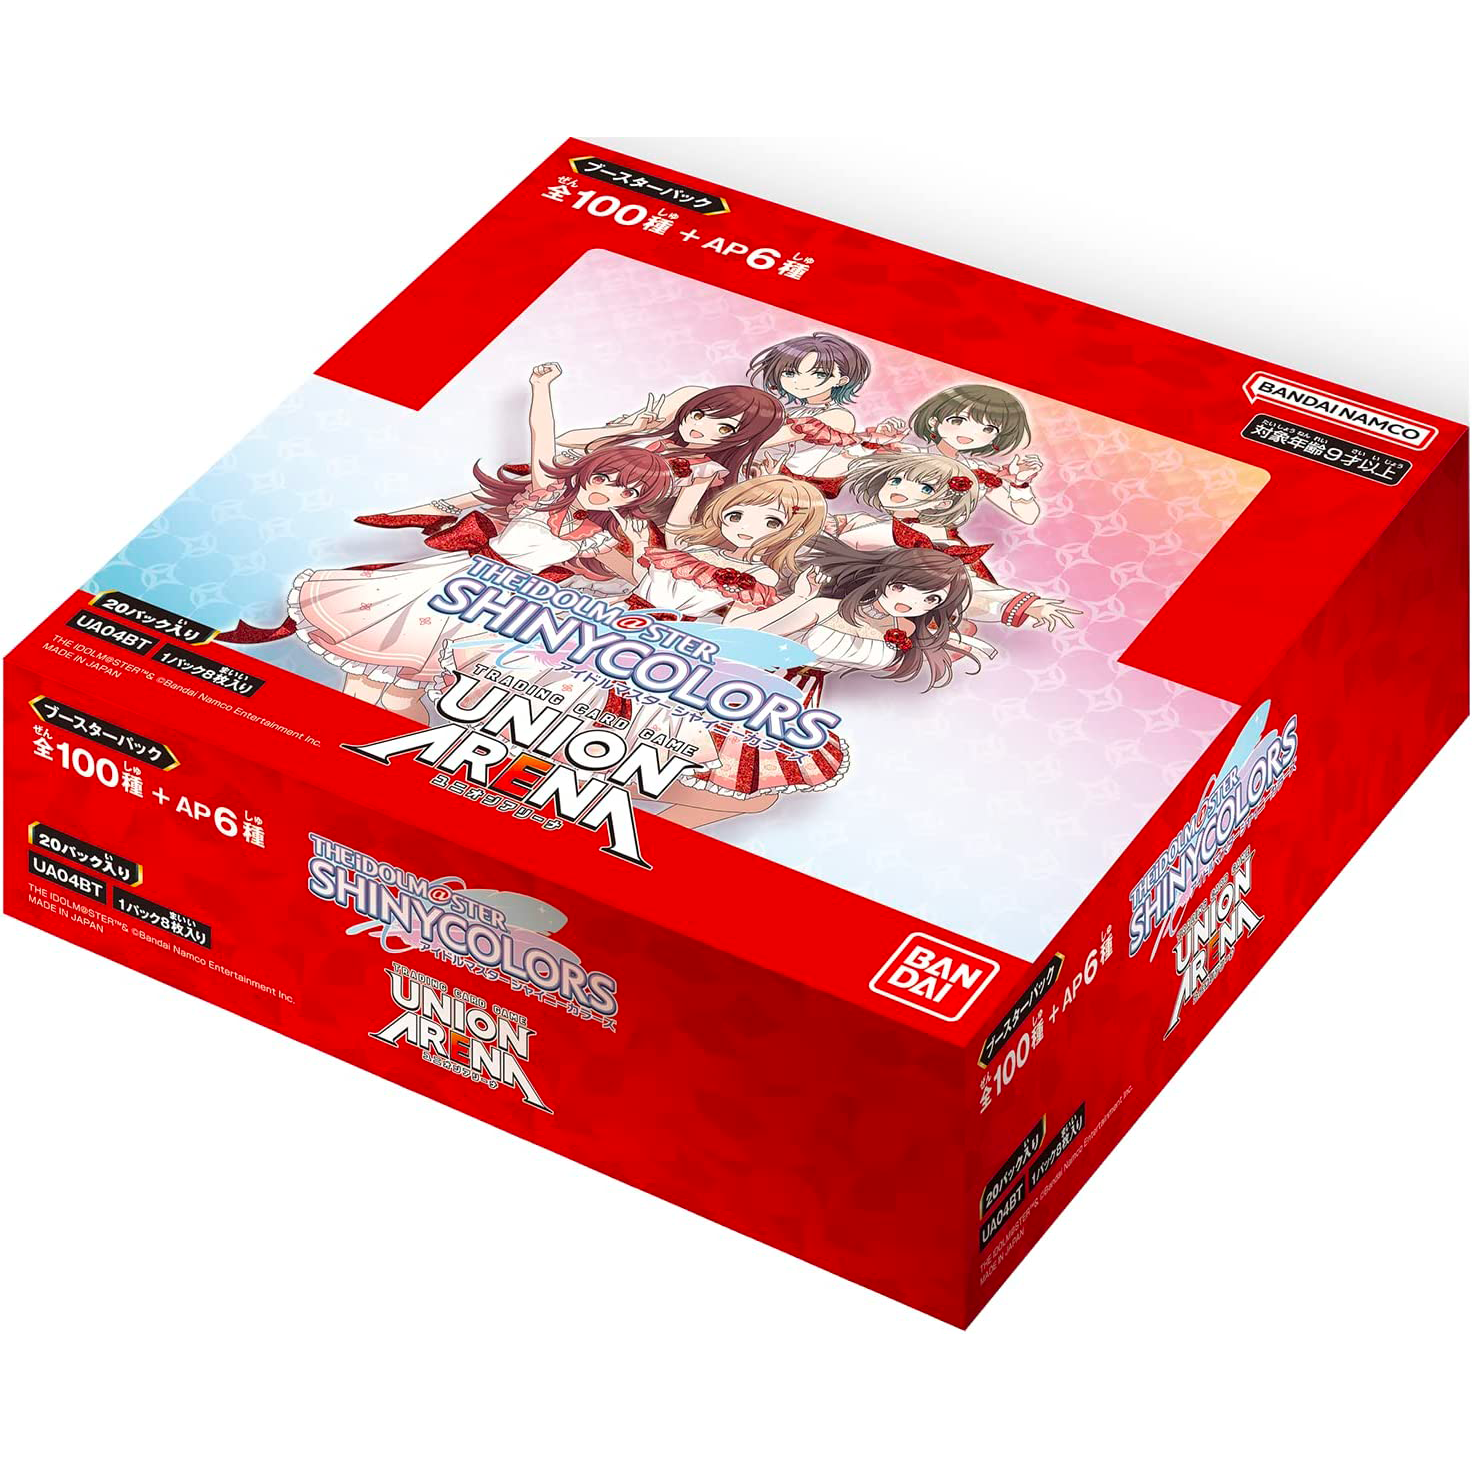 TRADING CARD GAME UNION ARENA [UA04BT] THE IDOLM@STER SHINYCOLORS - Box